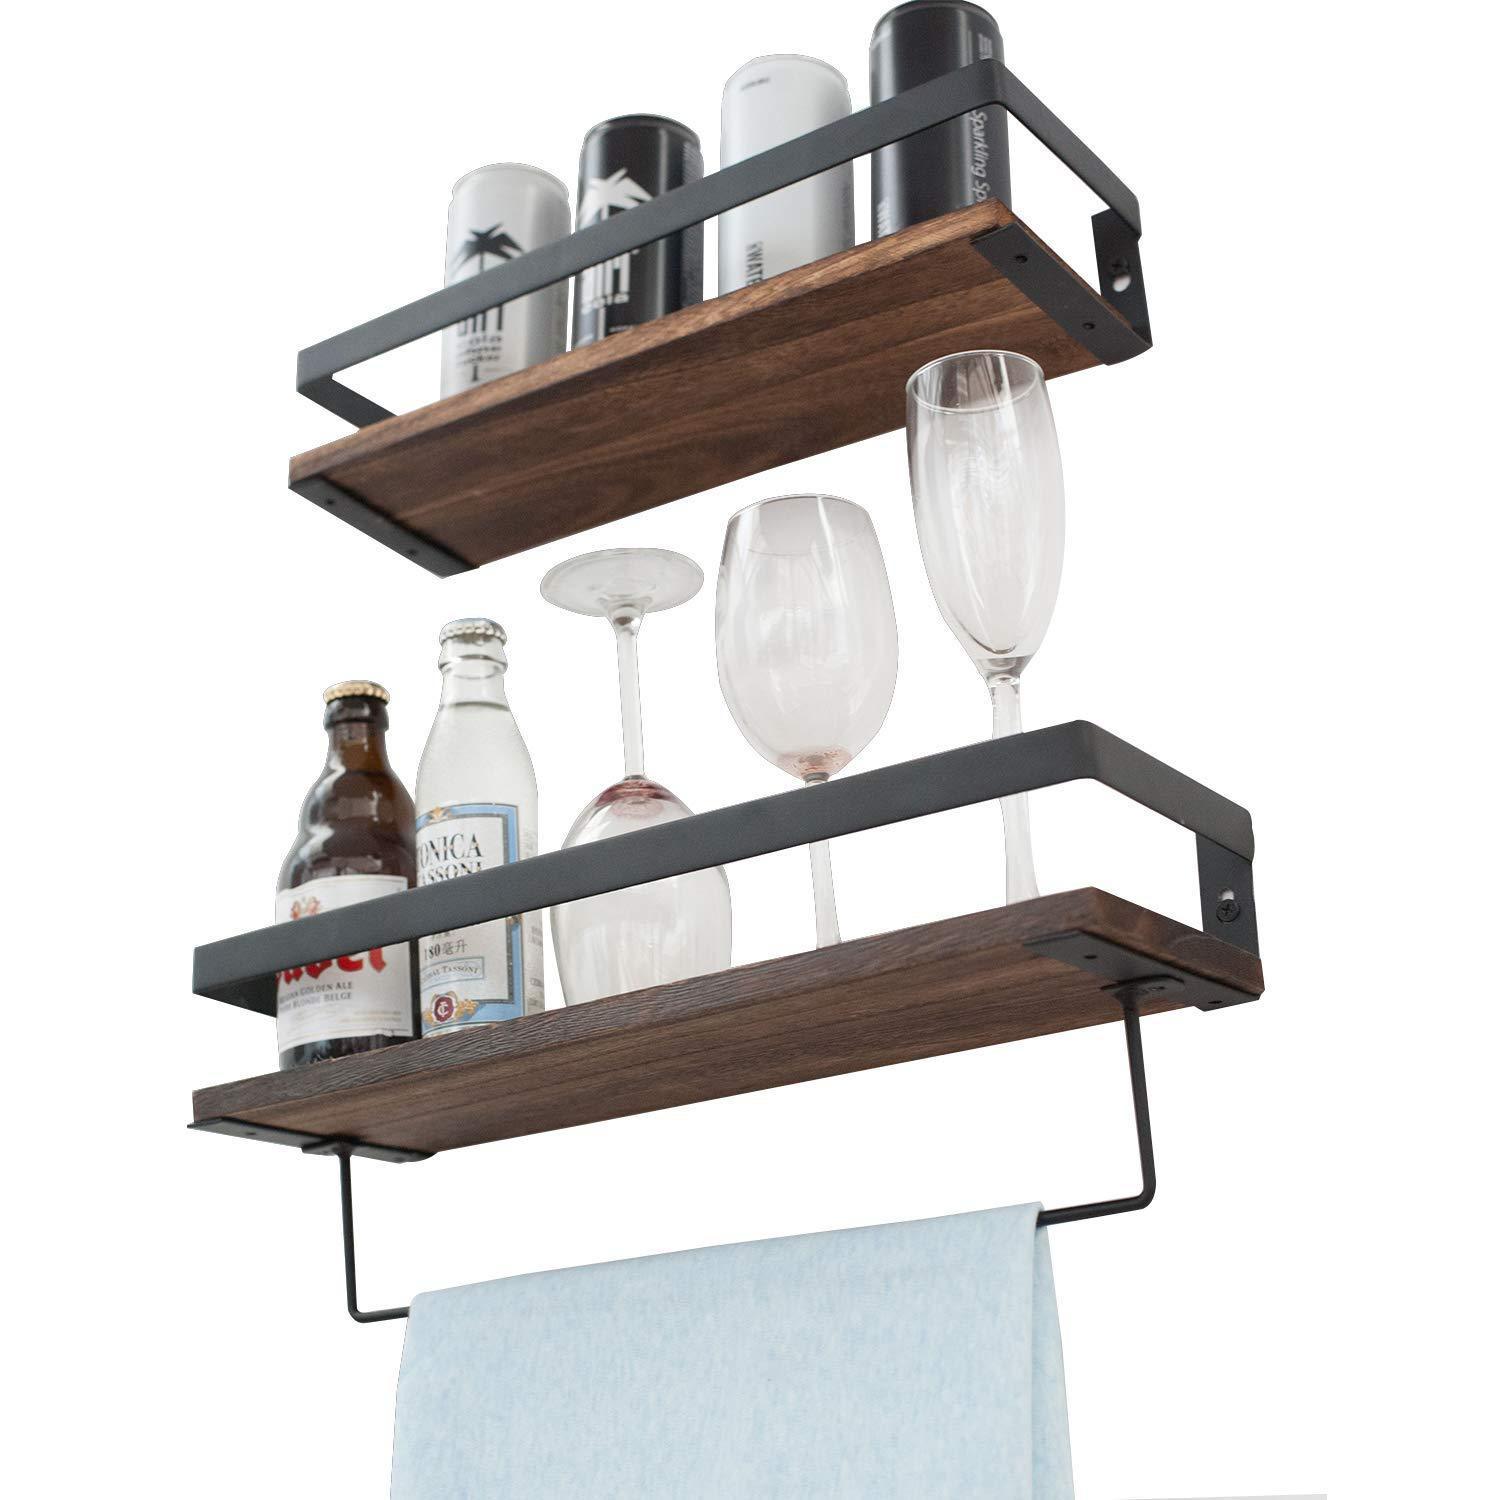 Try y me bathroom storage shelf wall mounted set of 2 rustic wood floating shelves with removable towel bar perfect for kitchen bathroom carbonized brown